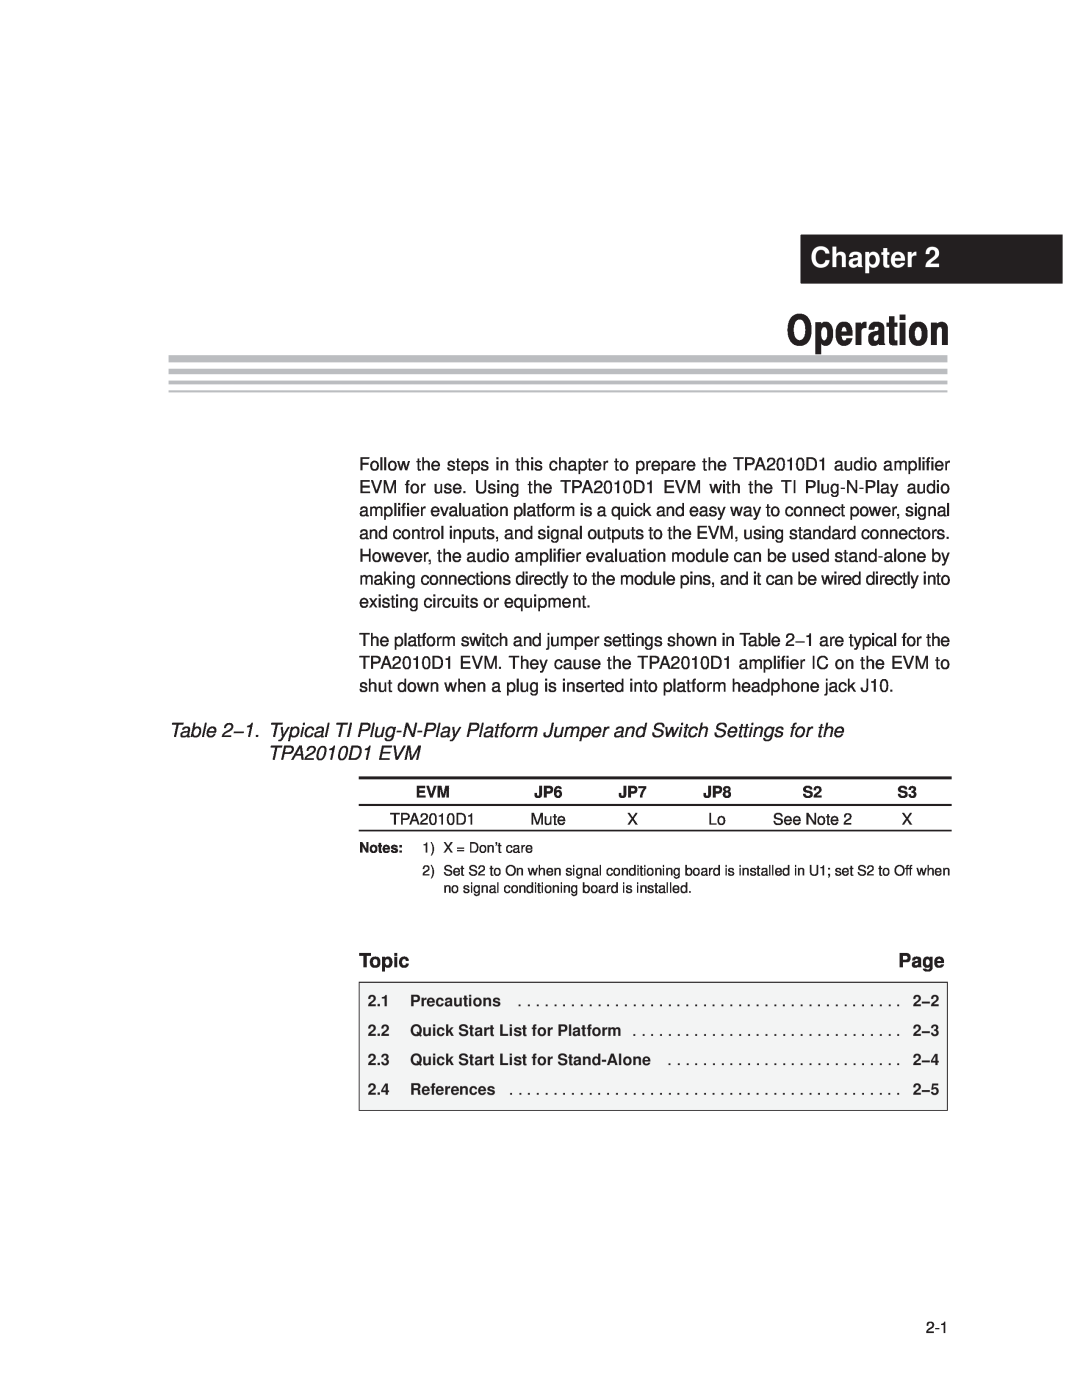 Texas Instruments 2004 manual Operation, Chapter, Page, Topic 